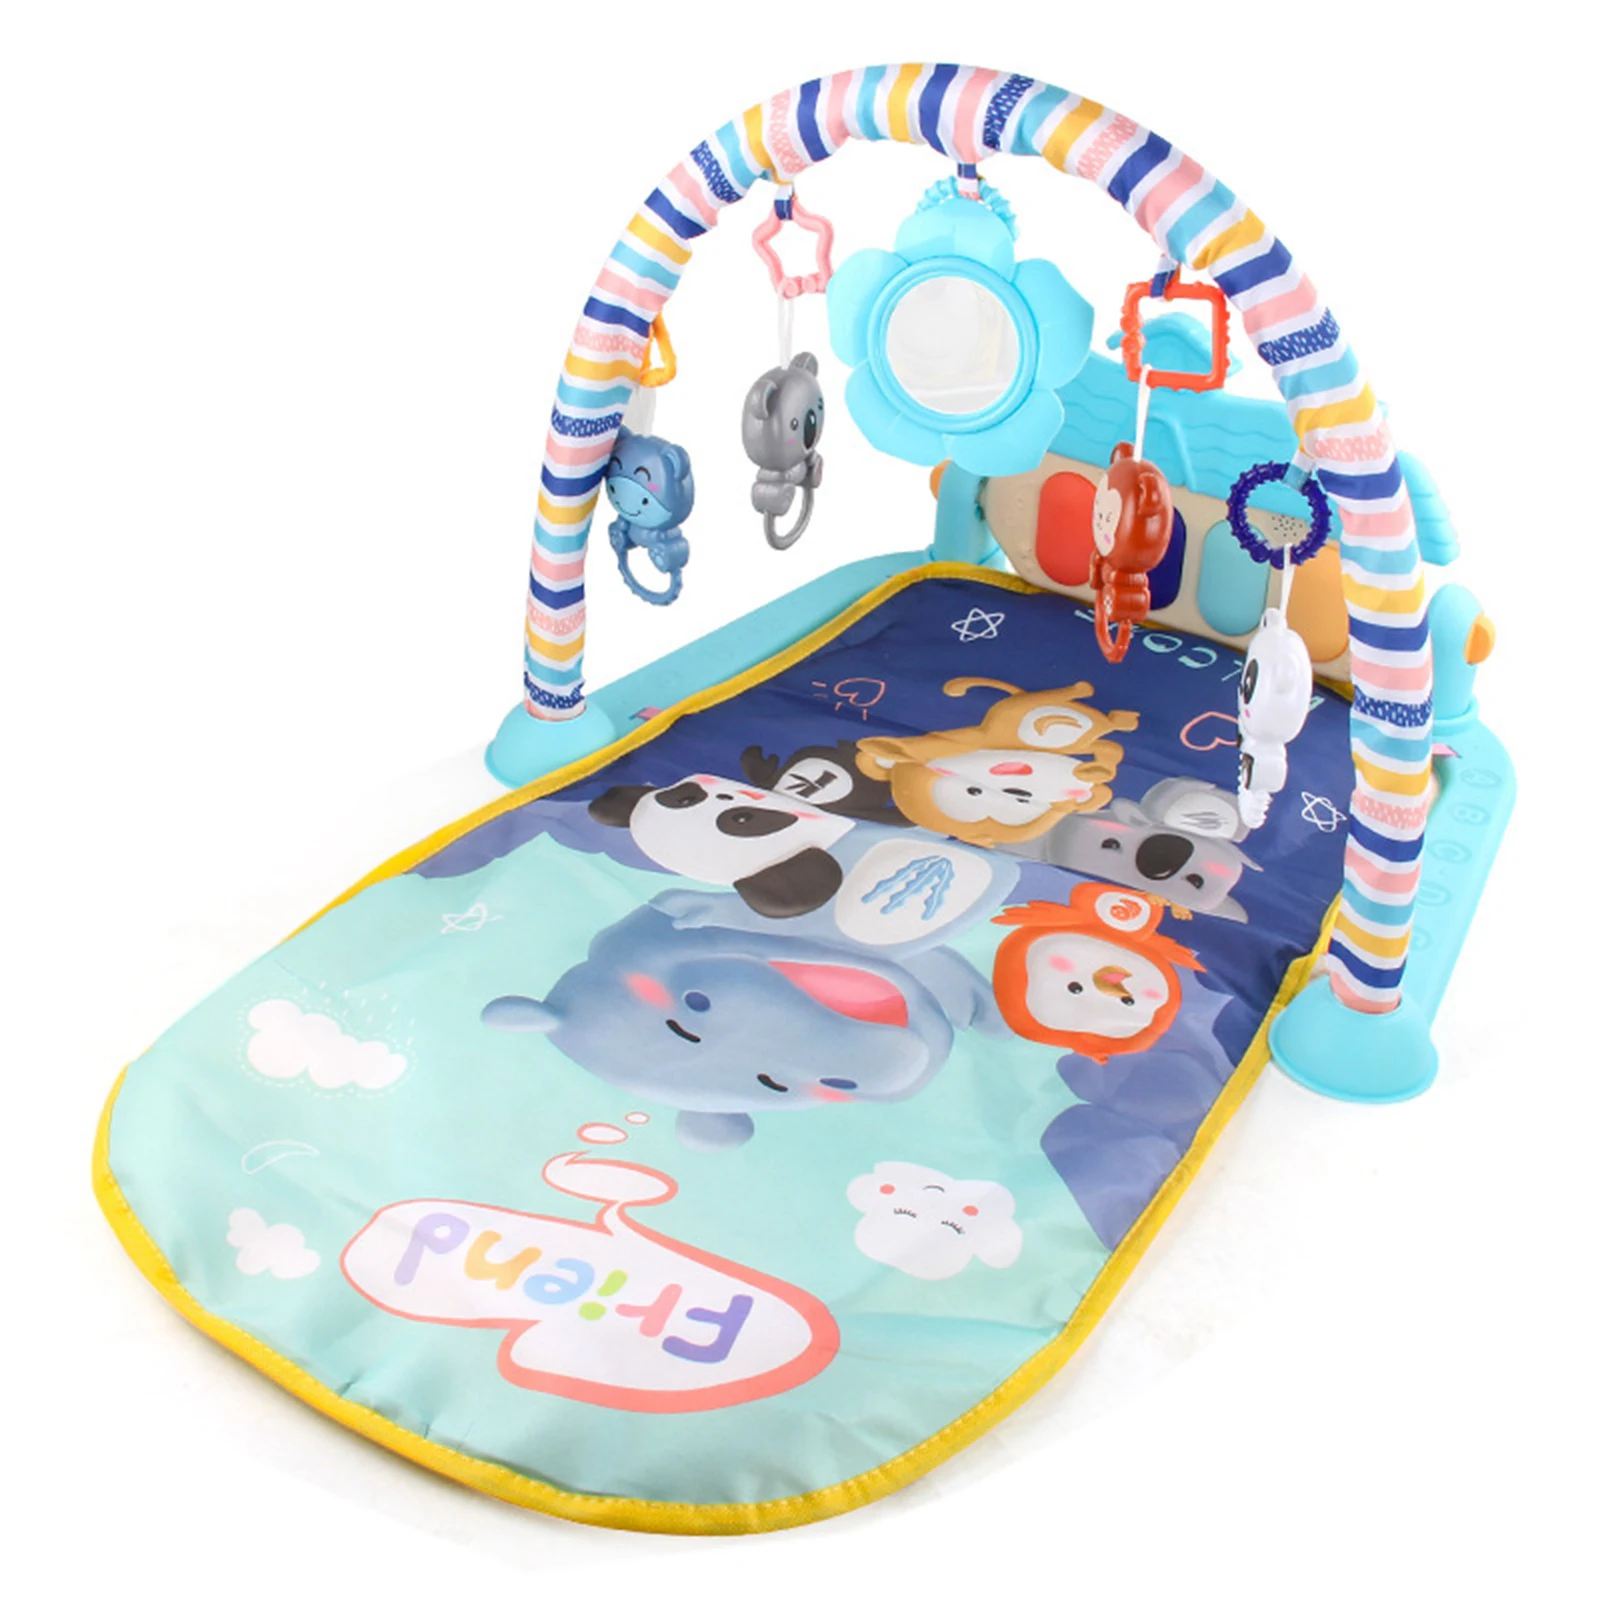 Baby Gym Puzzles Mat Educational Rack Toys Baby Music Play Mat with Piano Keyboard Infant Fitness Carpet Gift for Kids